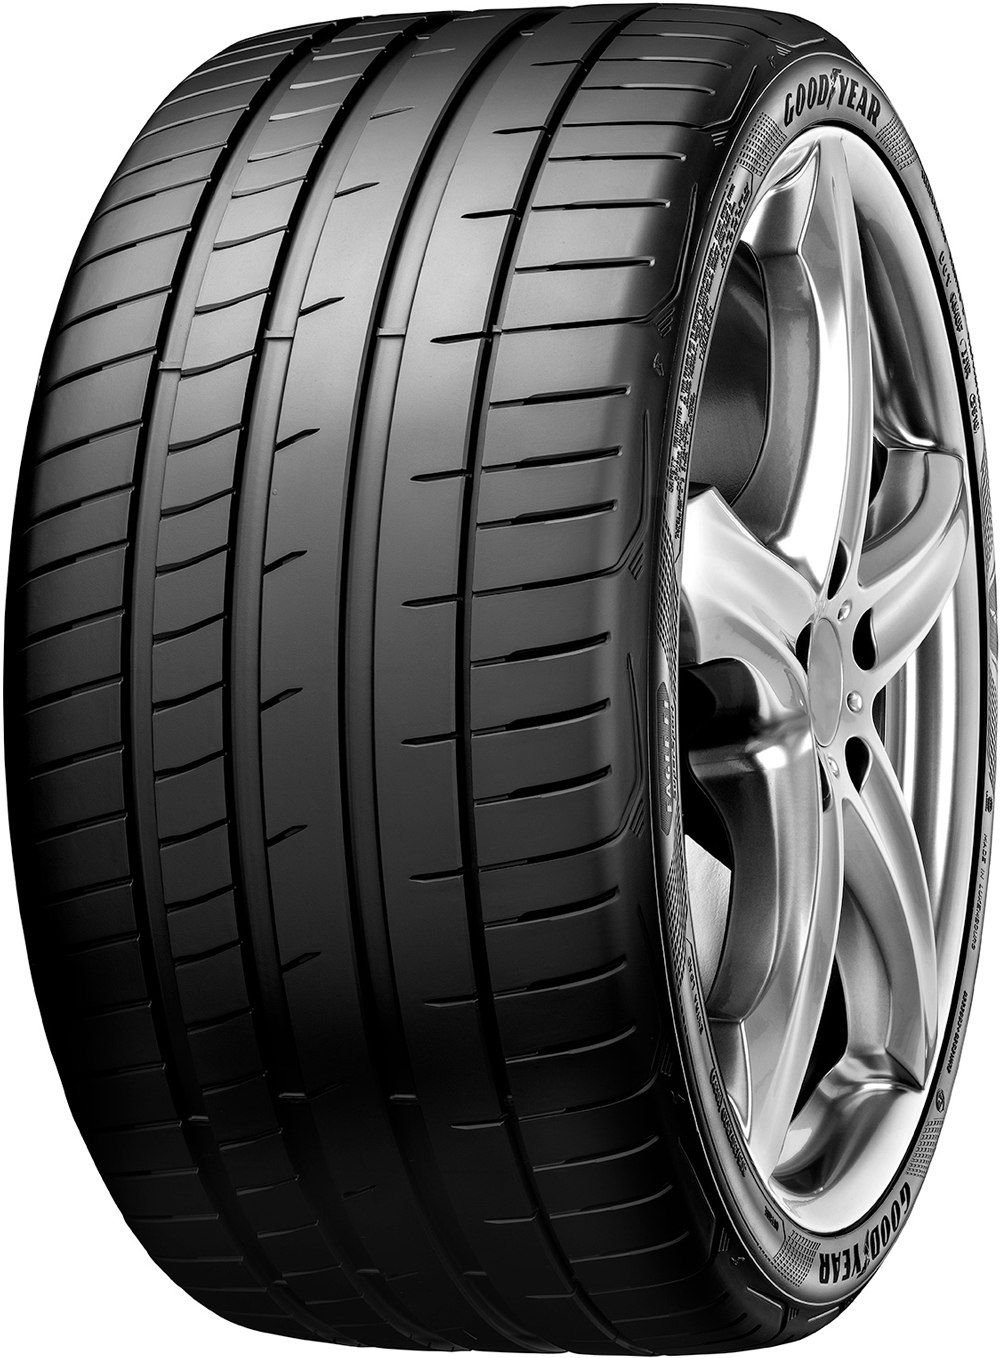 Anvelope auto GOODYEAR Eagle Supersport XL FP 295/30 R20 101Y